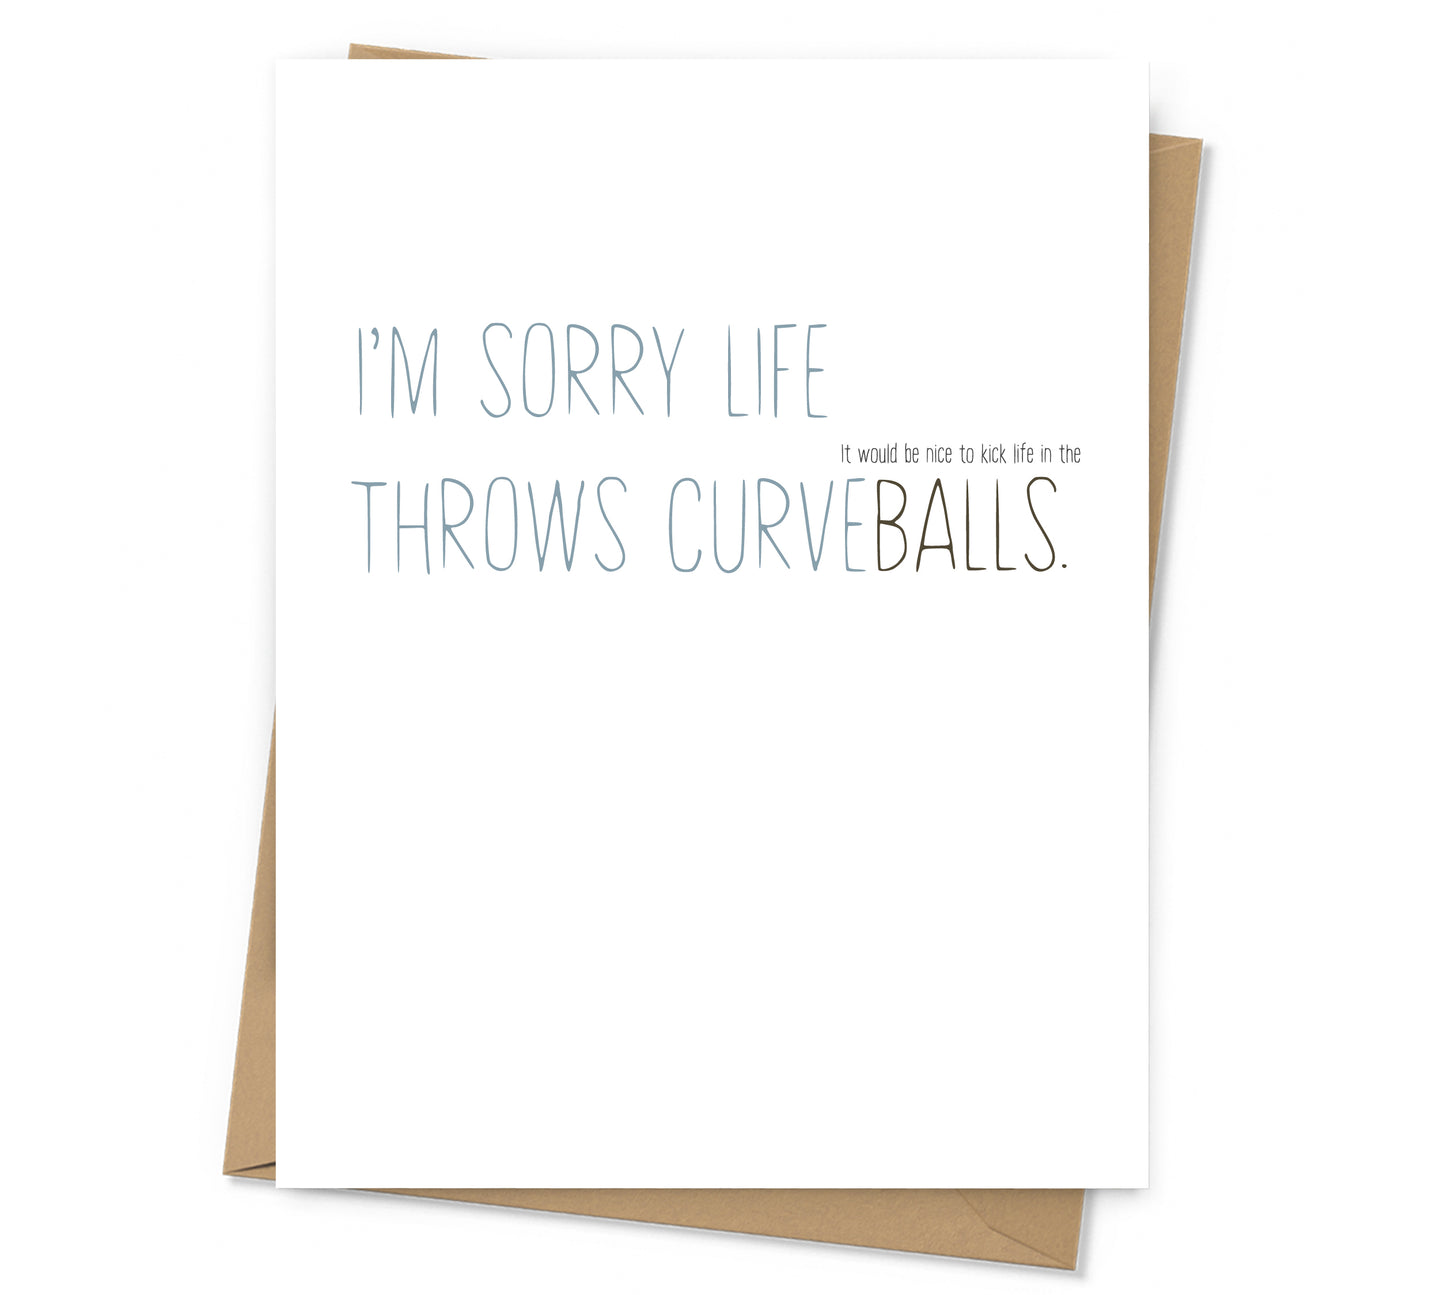 i'm sorry life throws curveballs with it would be nice to kick life in the balls in small text over the 